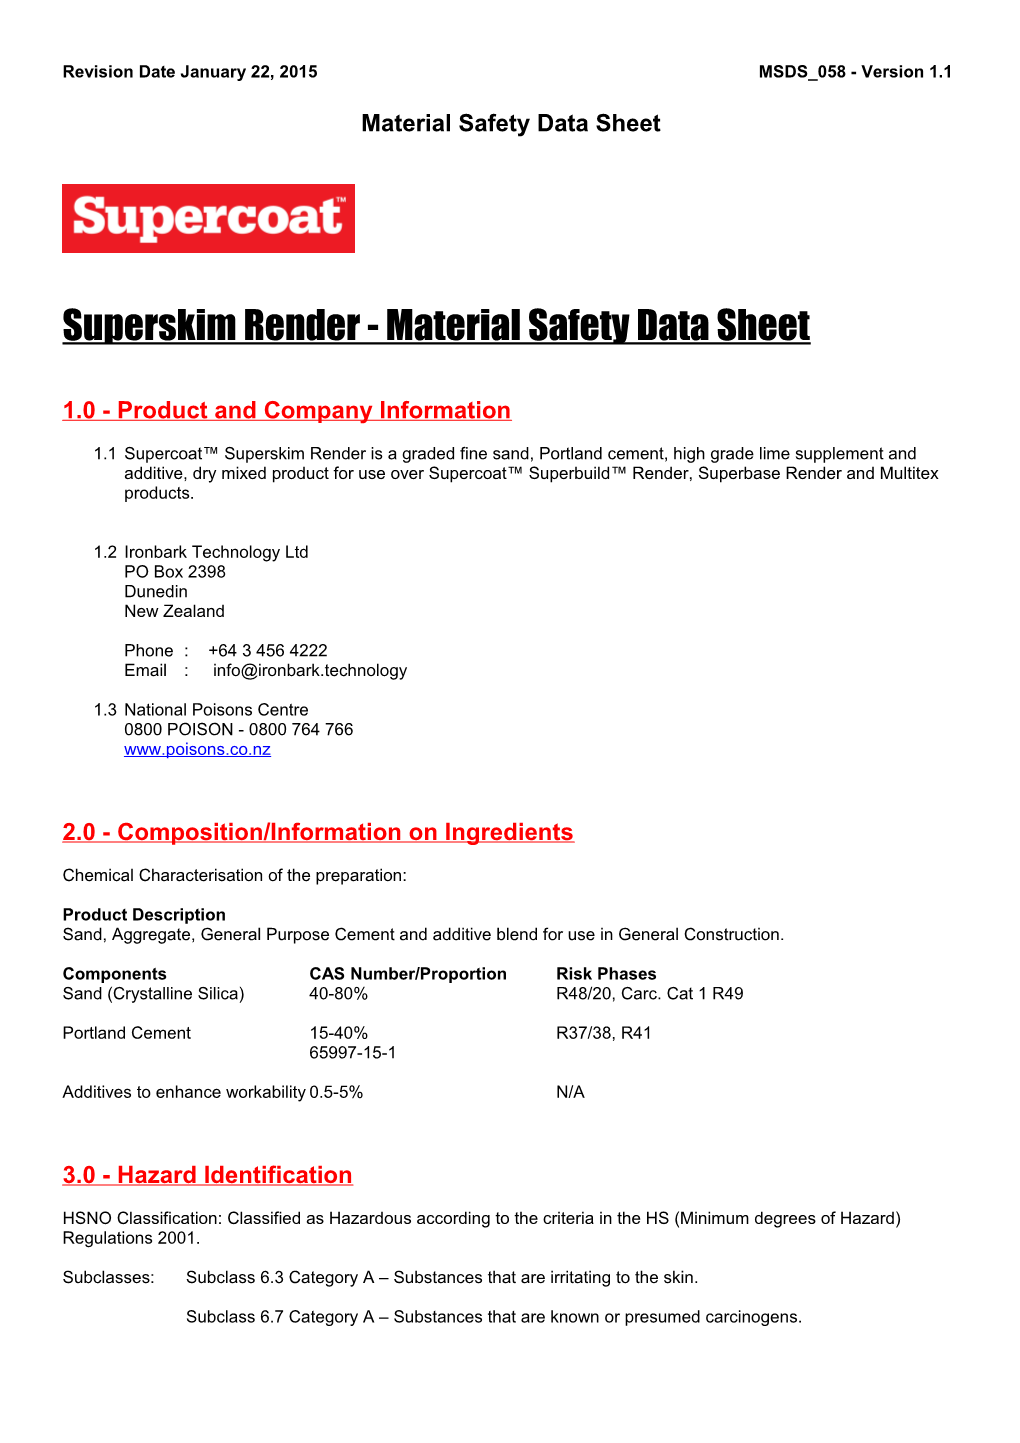 Revision Date January 22, 2015 MSDS 058 - Version 1.1